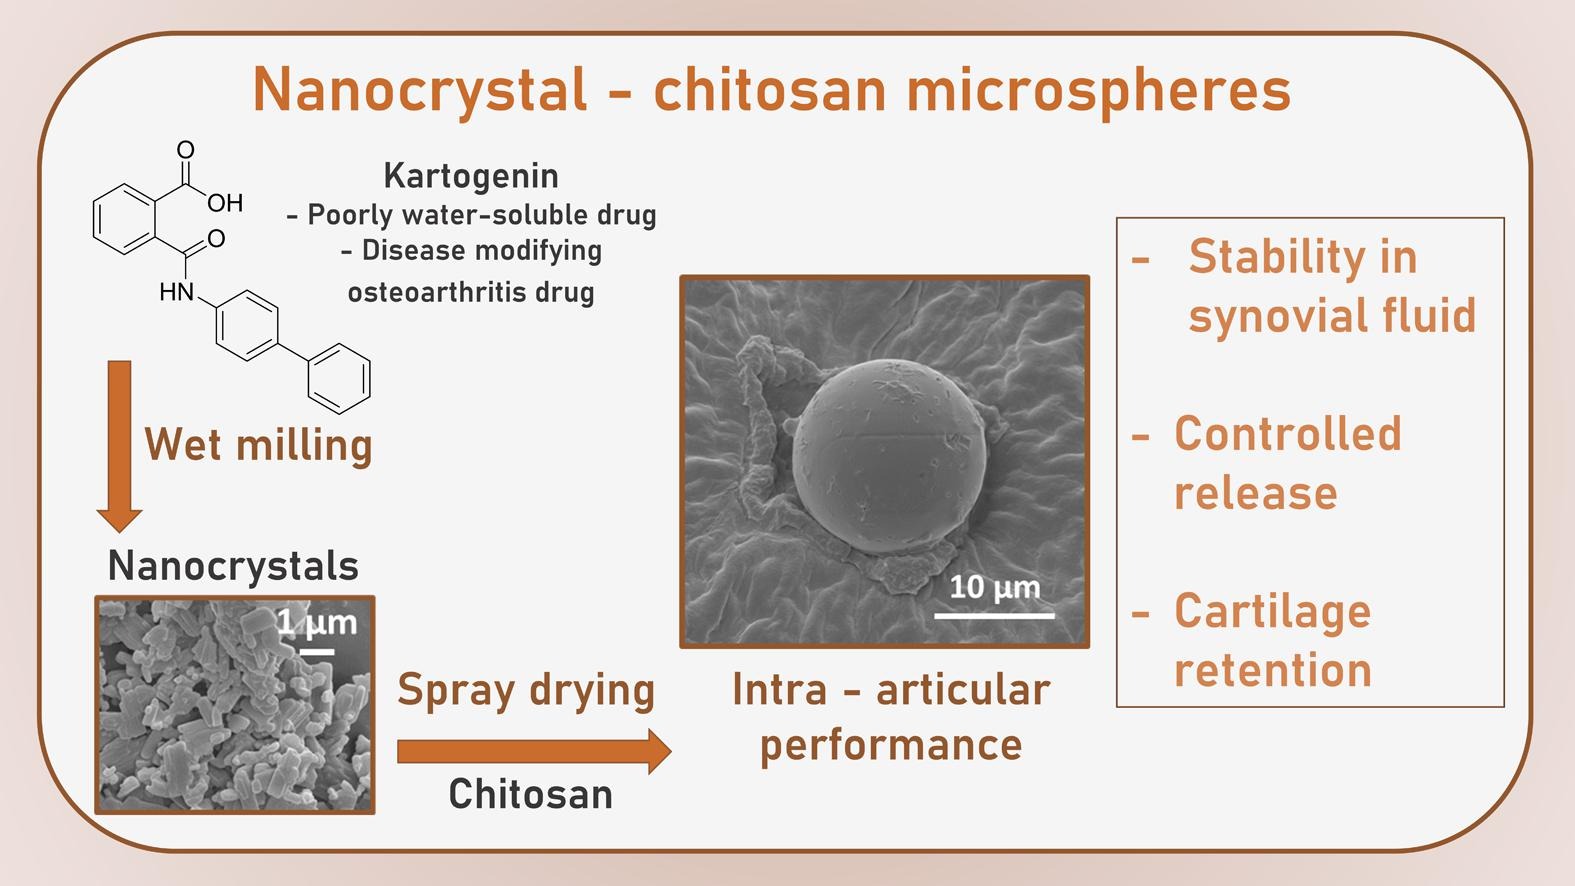 Nanocrystal-chitosan particles for intra-articular delivery of disease-modifying osteoarthritis drugs